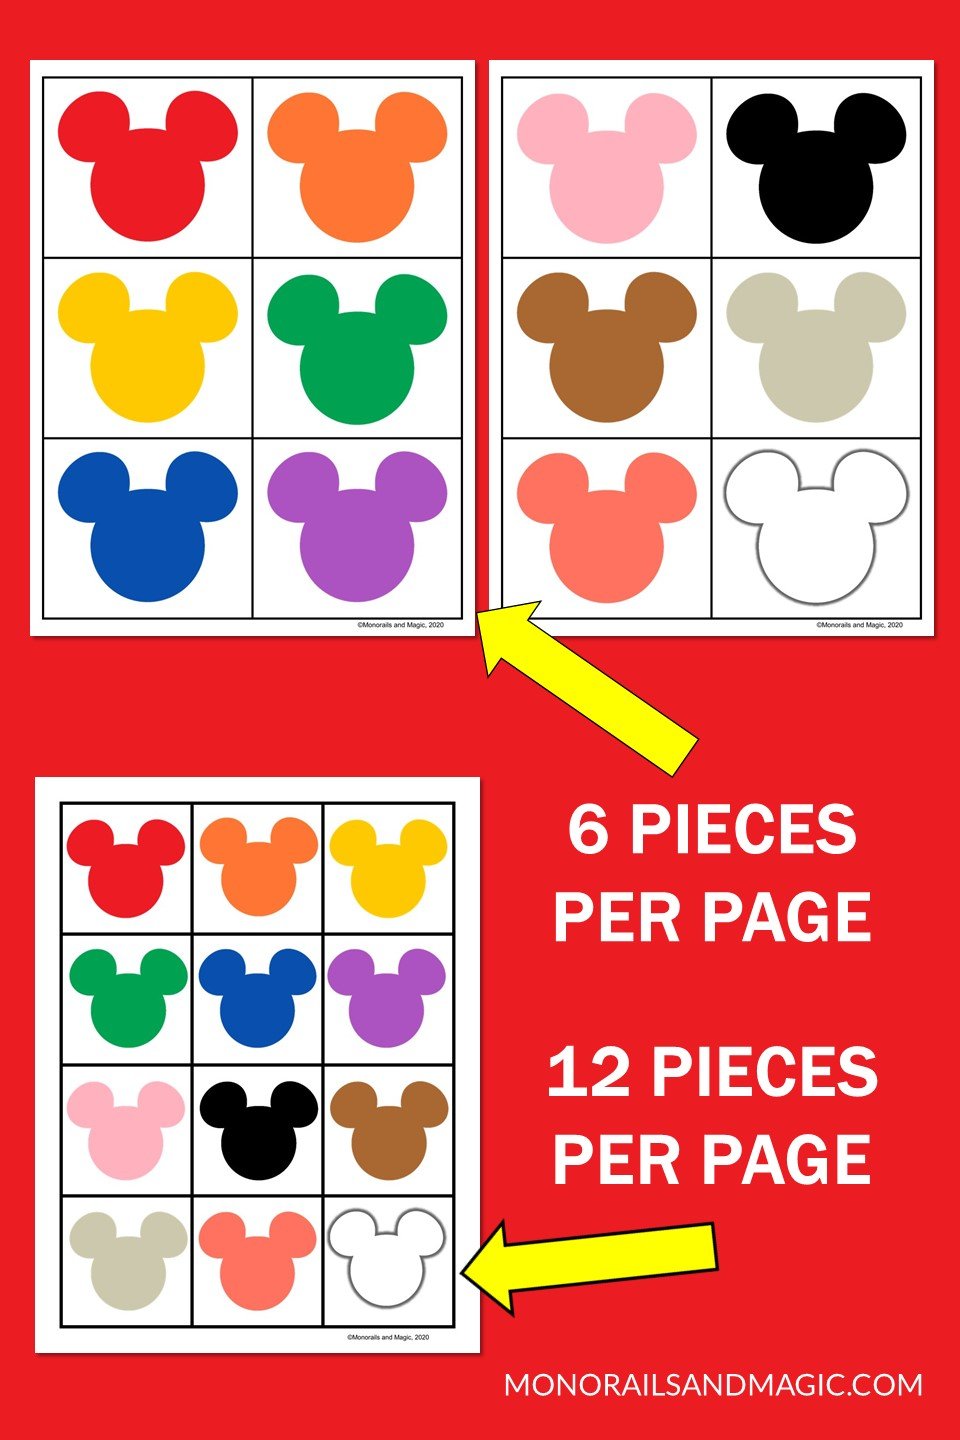 Free printable Mickey mouse colors memory game.